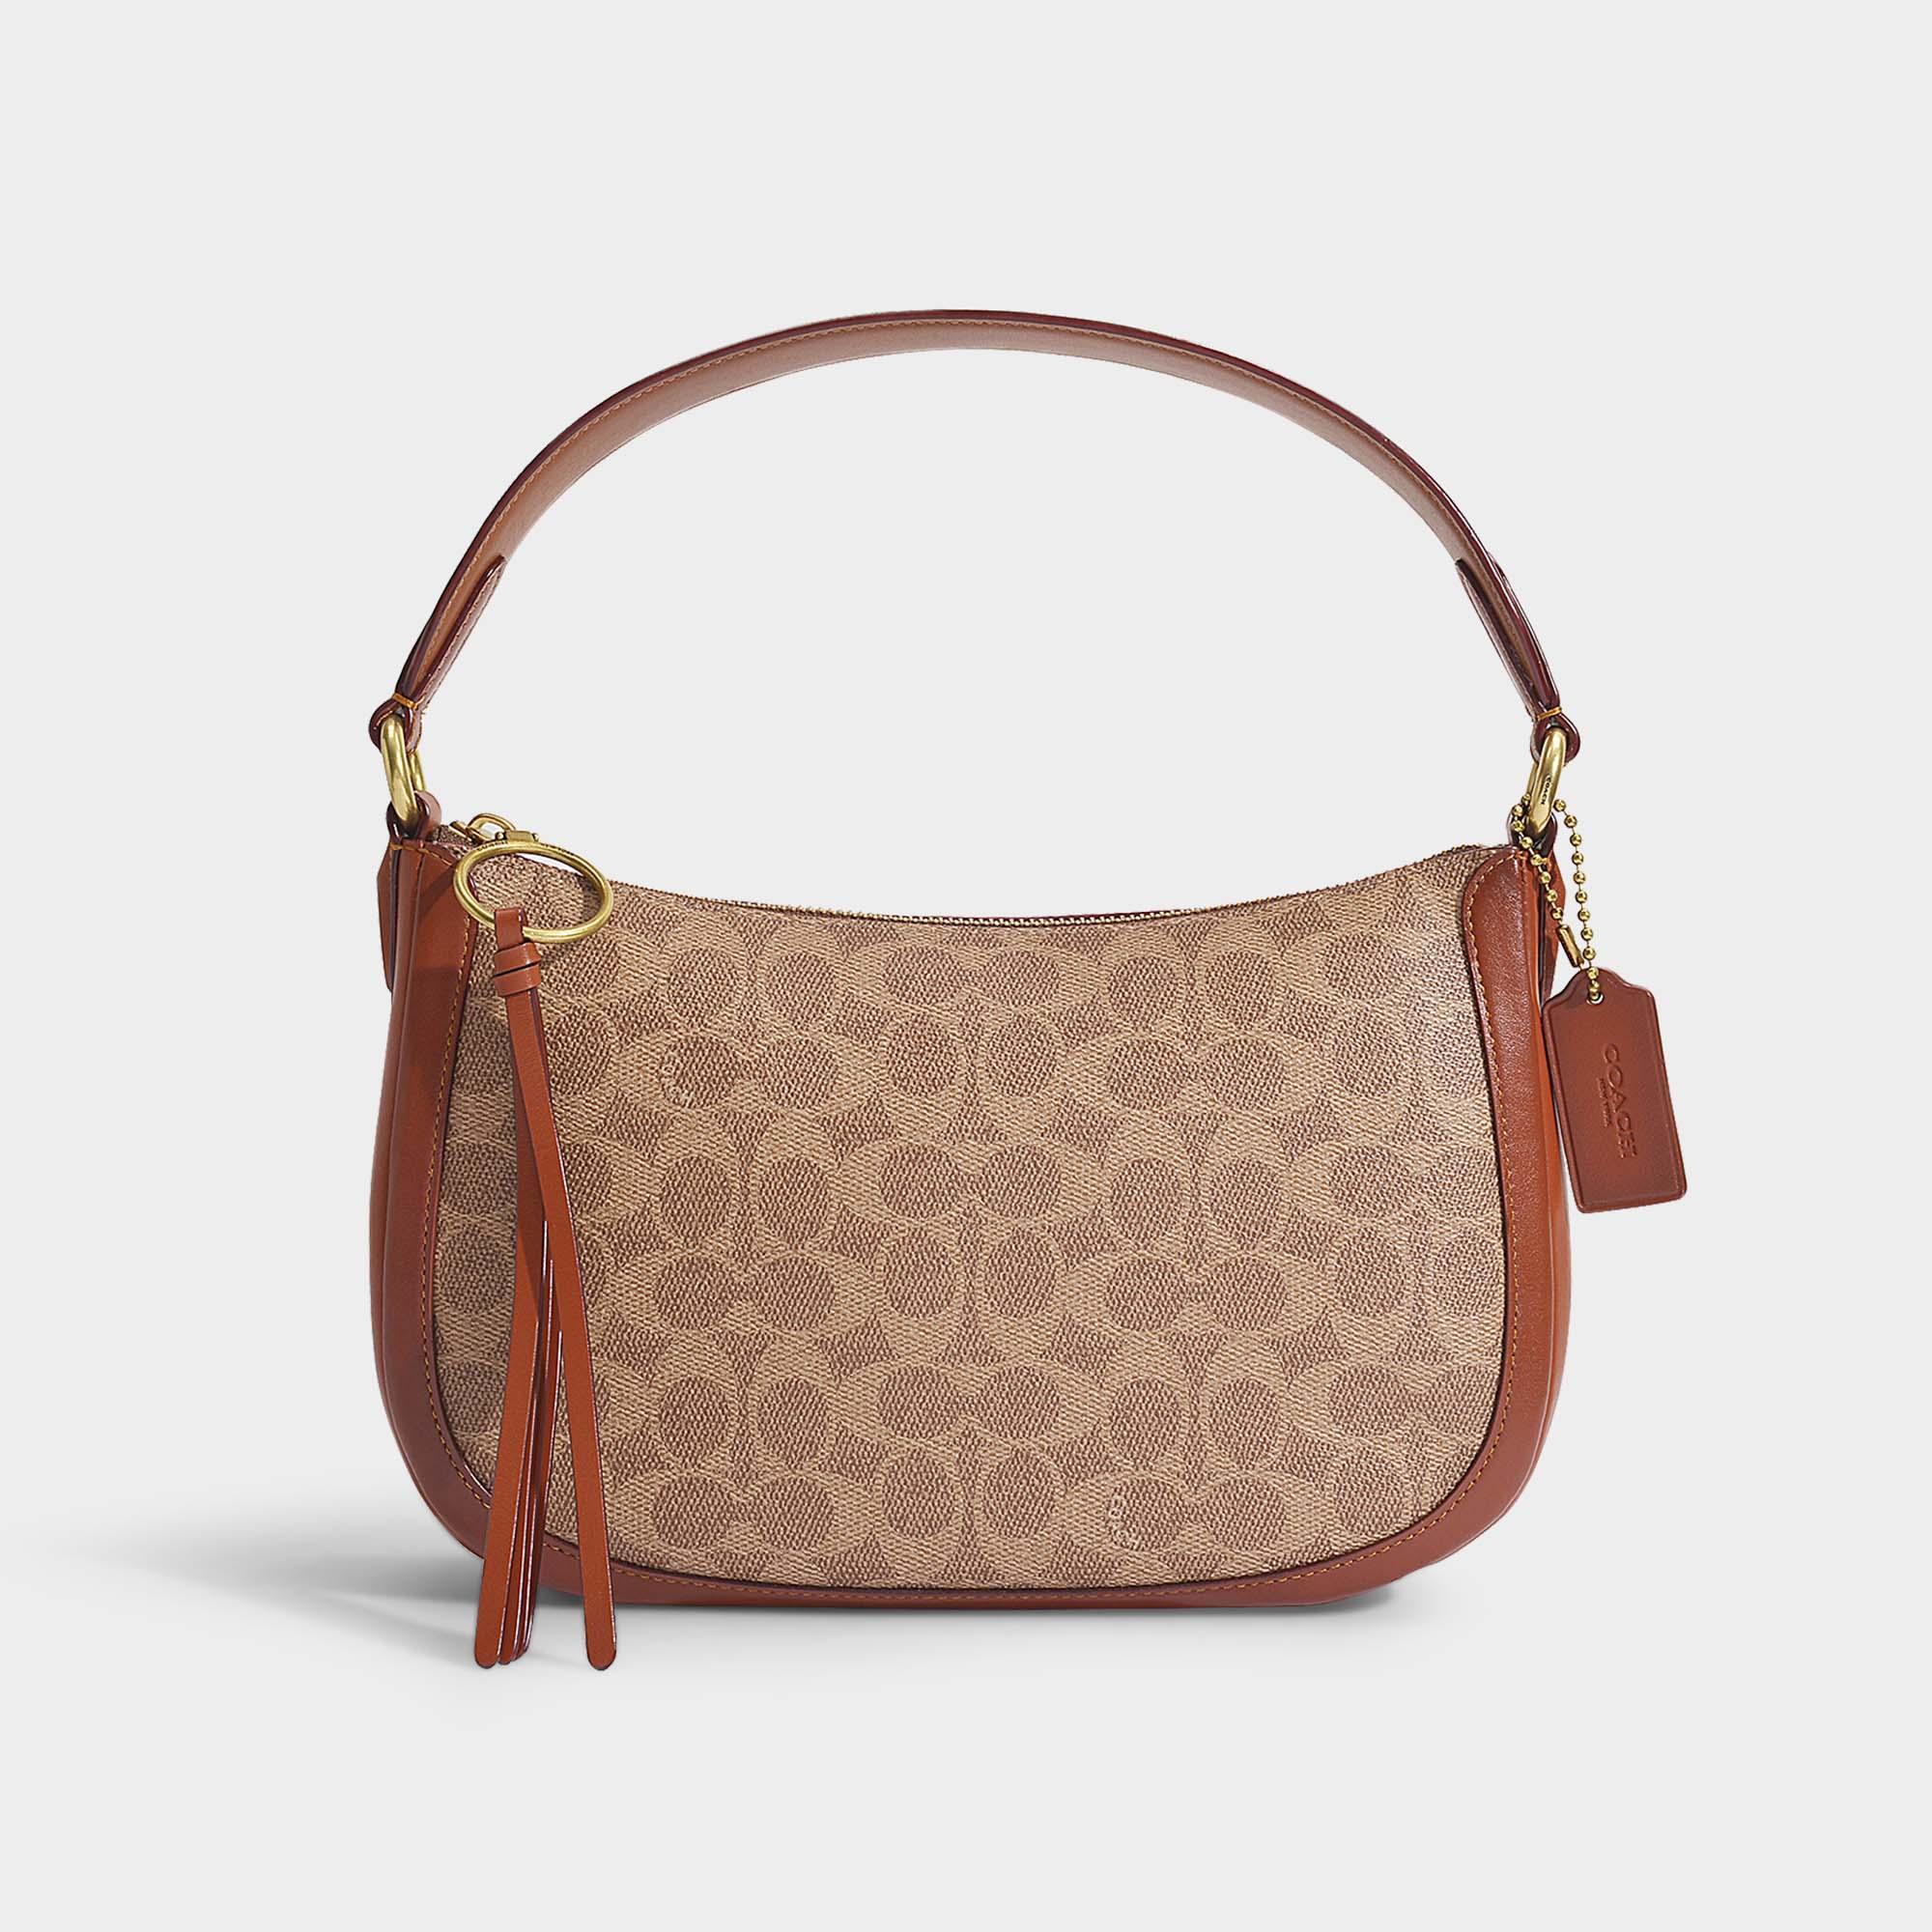 COACH Signature Coated Canvas Sutton Crossbody Bag In Brown Pvc in Brown - Lyst